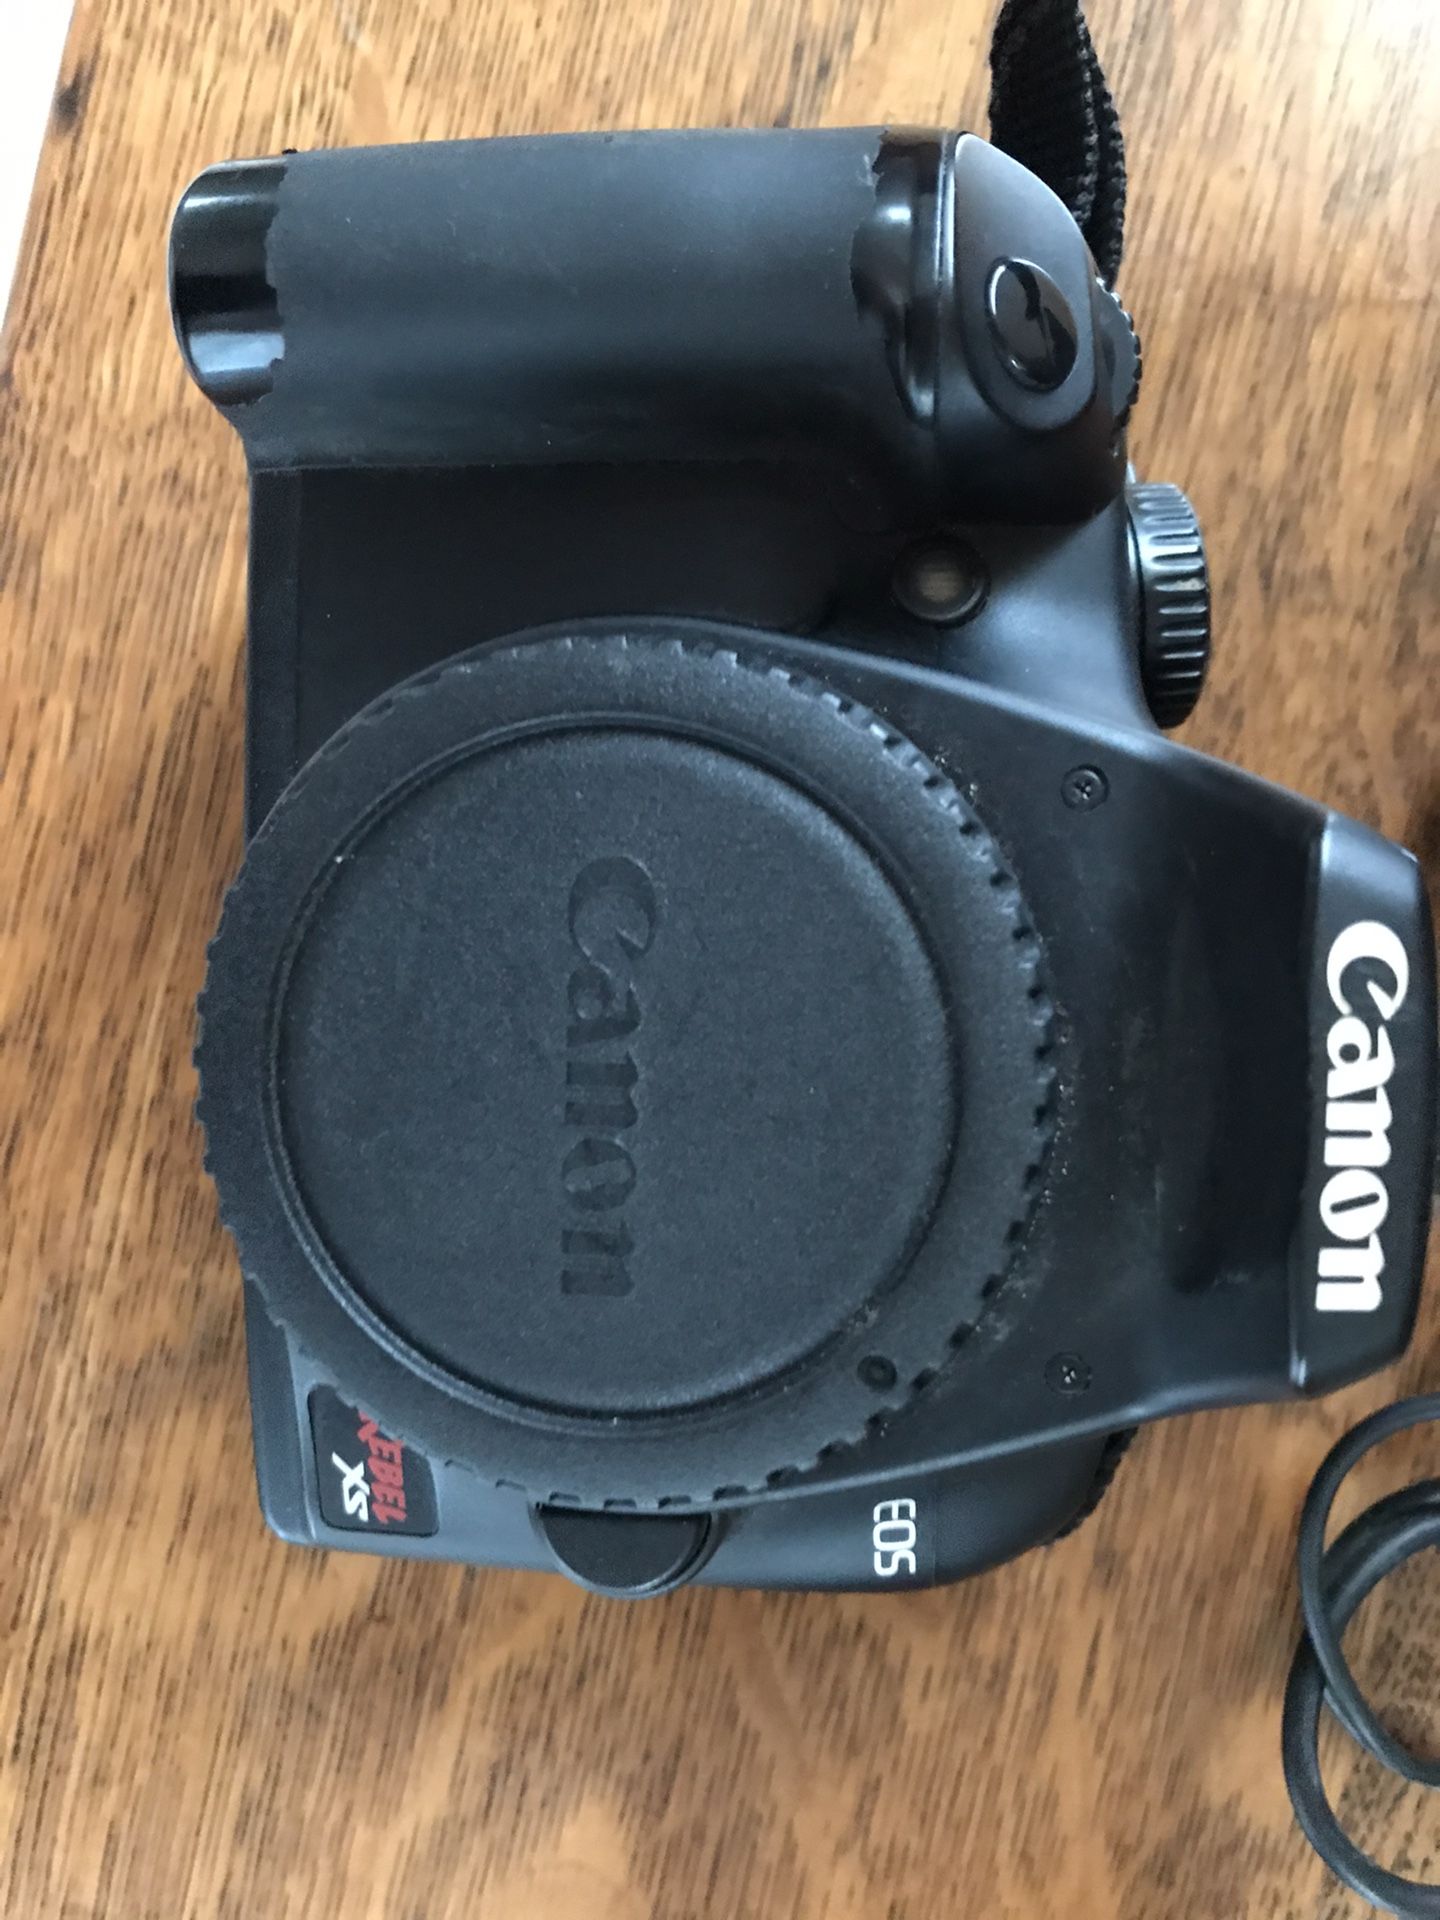 Cannon EOS camera with 18-55 lens, camera for parts or to be fixed